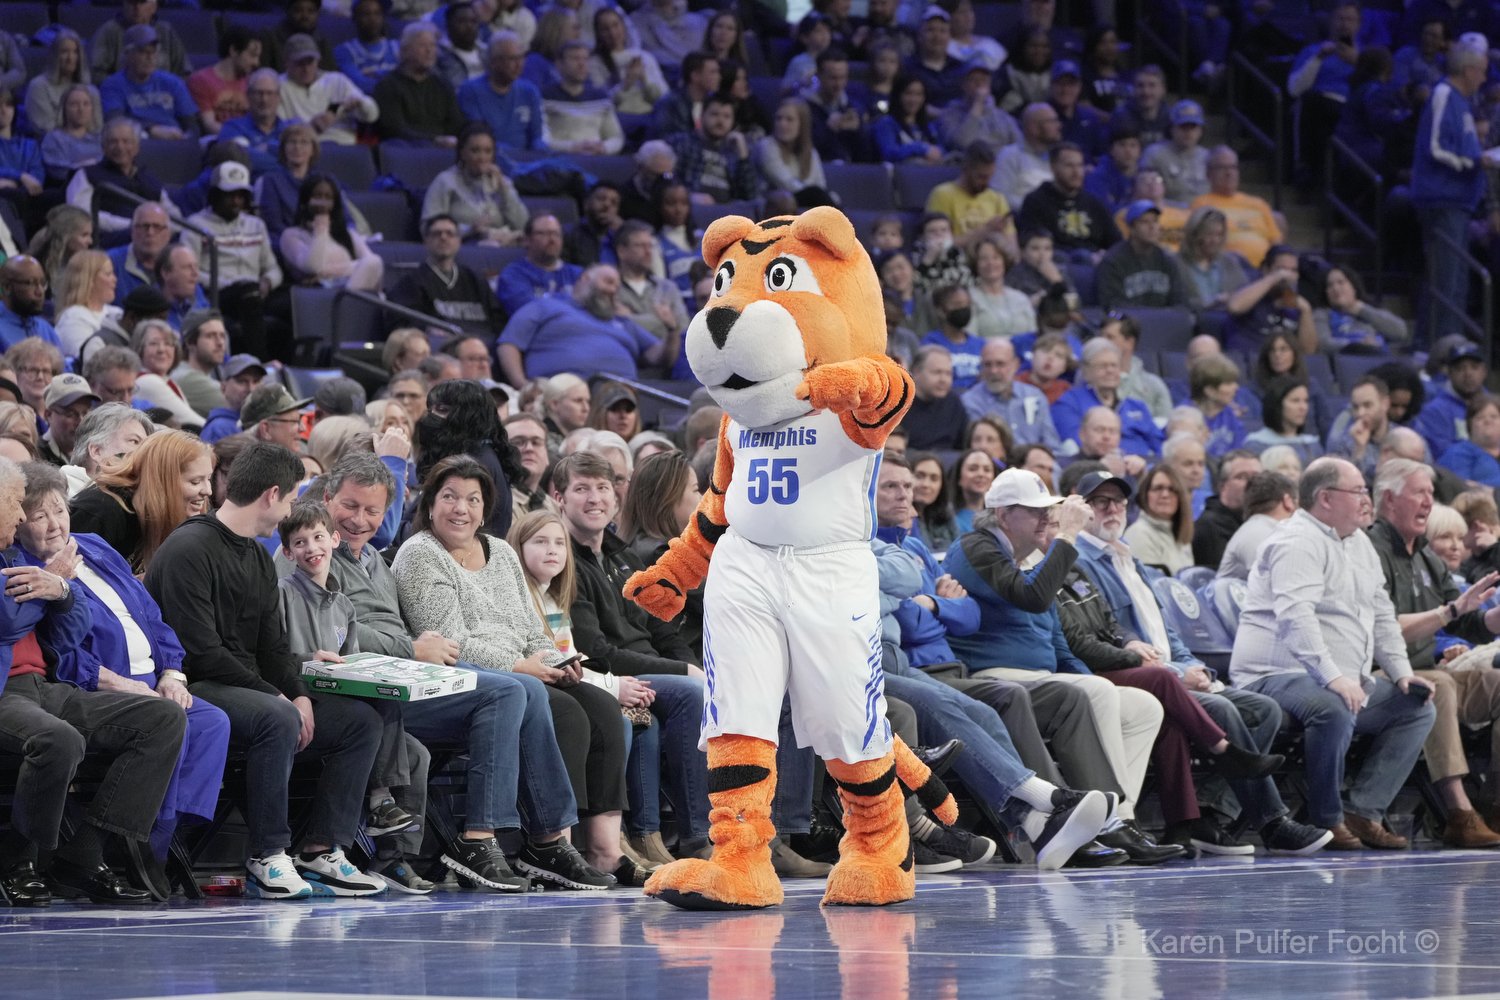 MEMPHIS, TN - MARCH 01: Memphis Tigers mascot Pouncer waives to